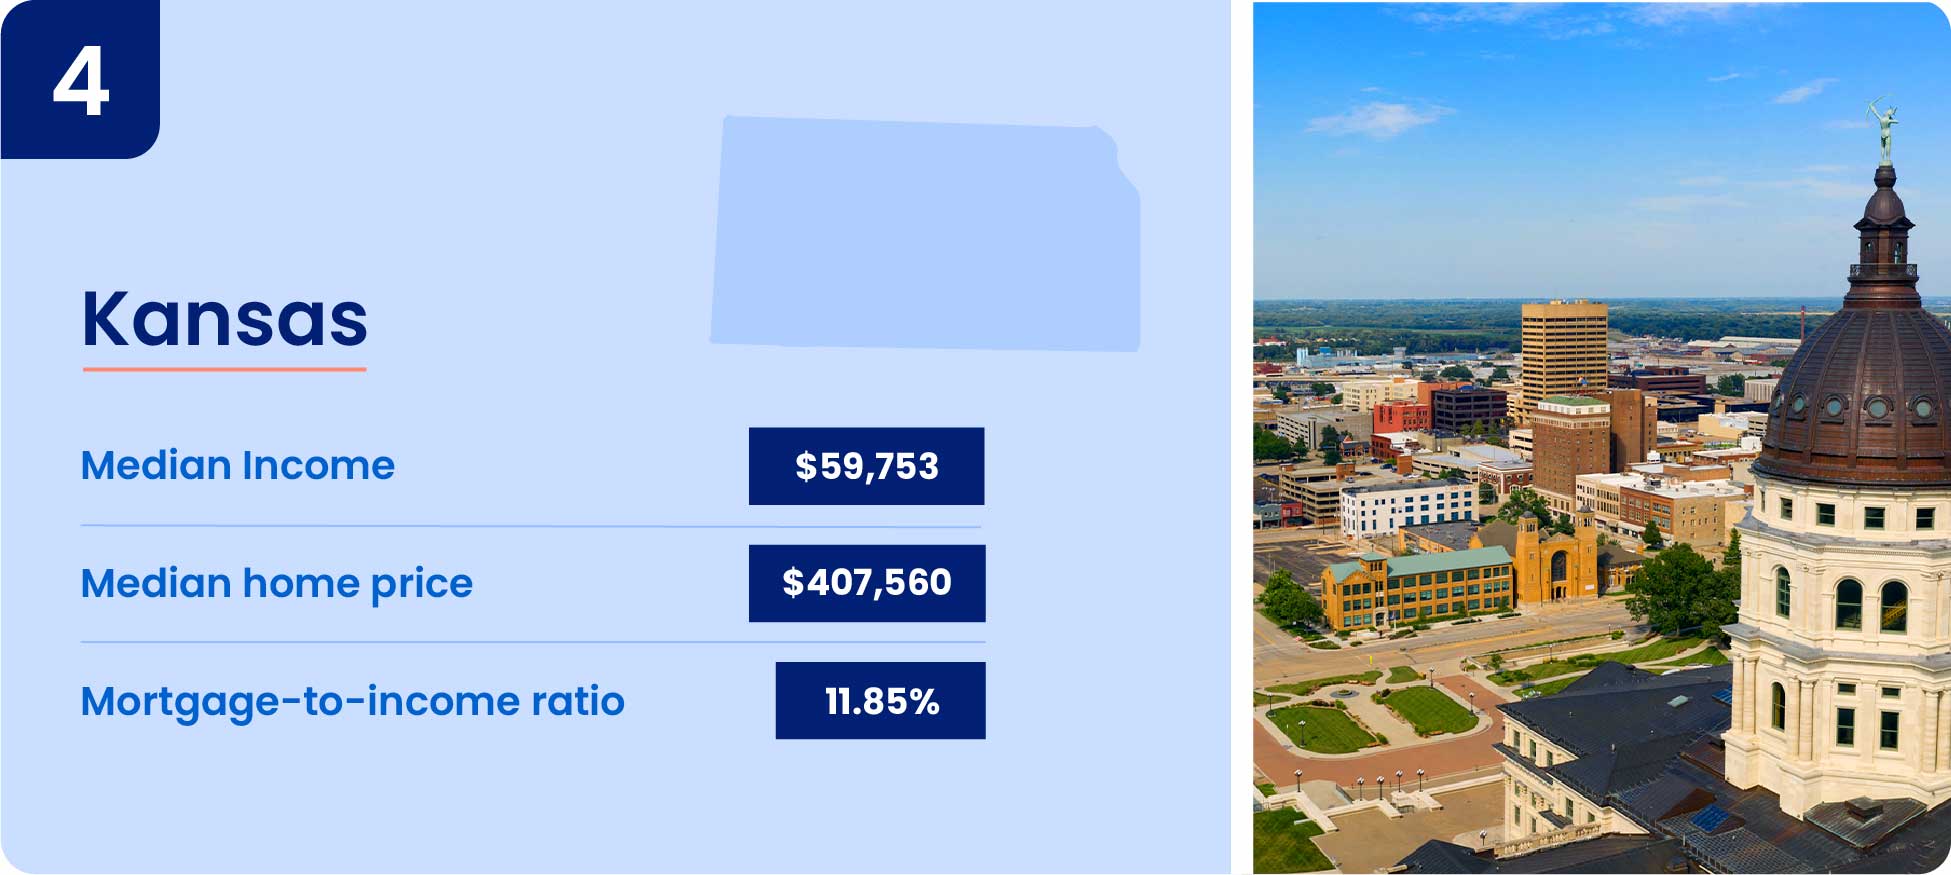 Image shows why one of the cheapest states to buy a house is Kansas.